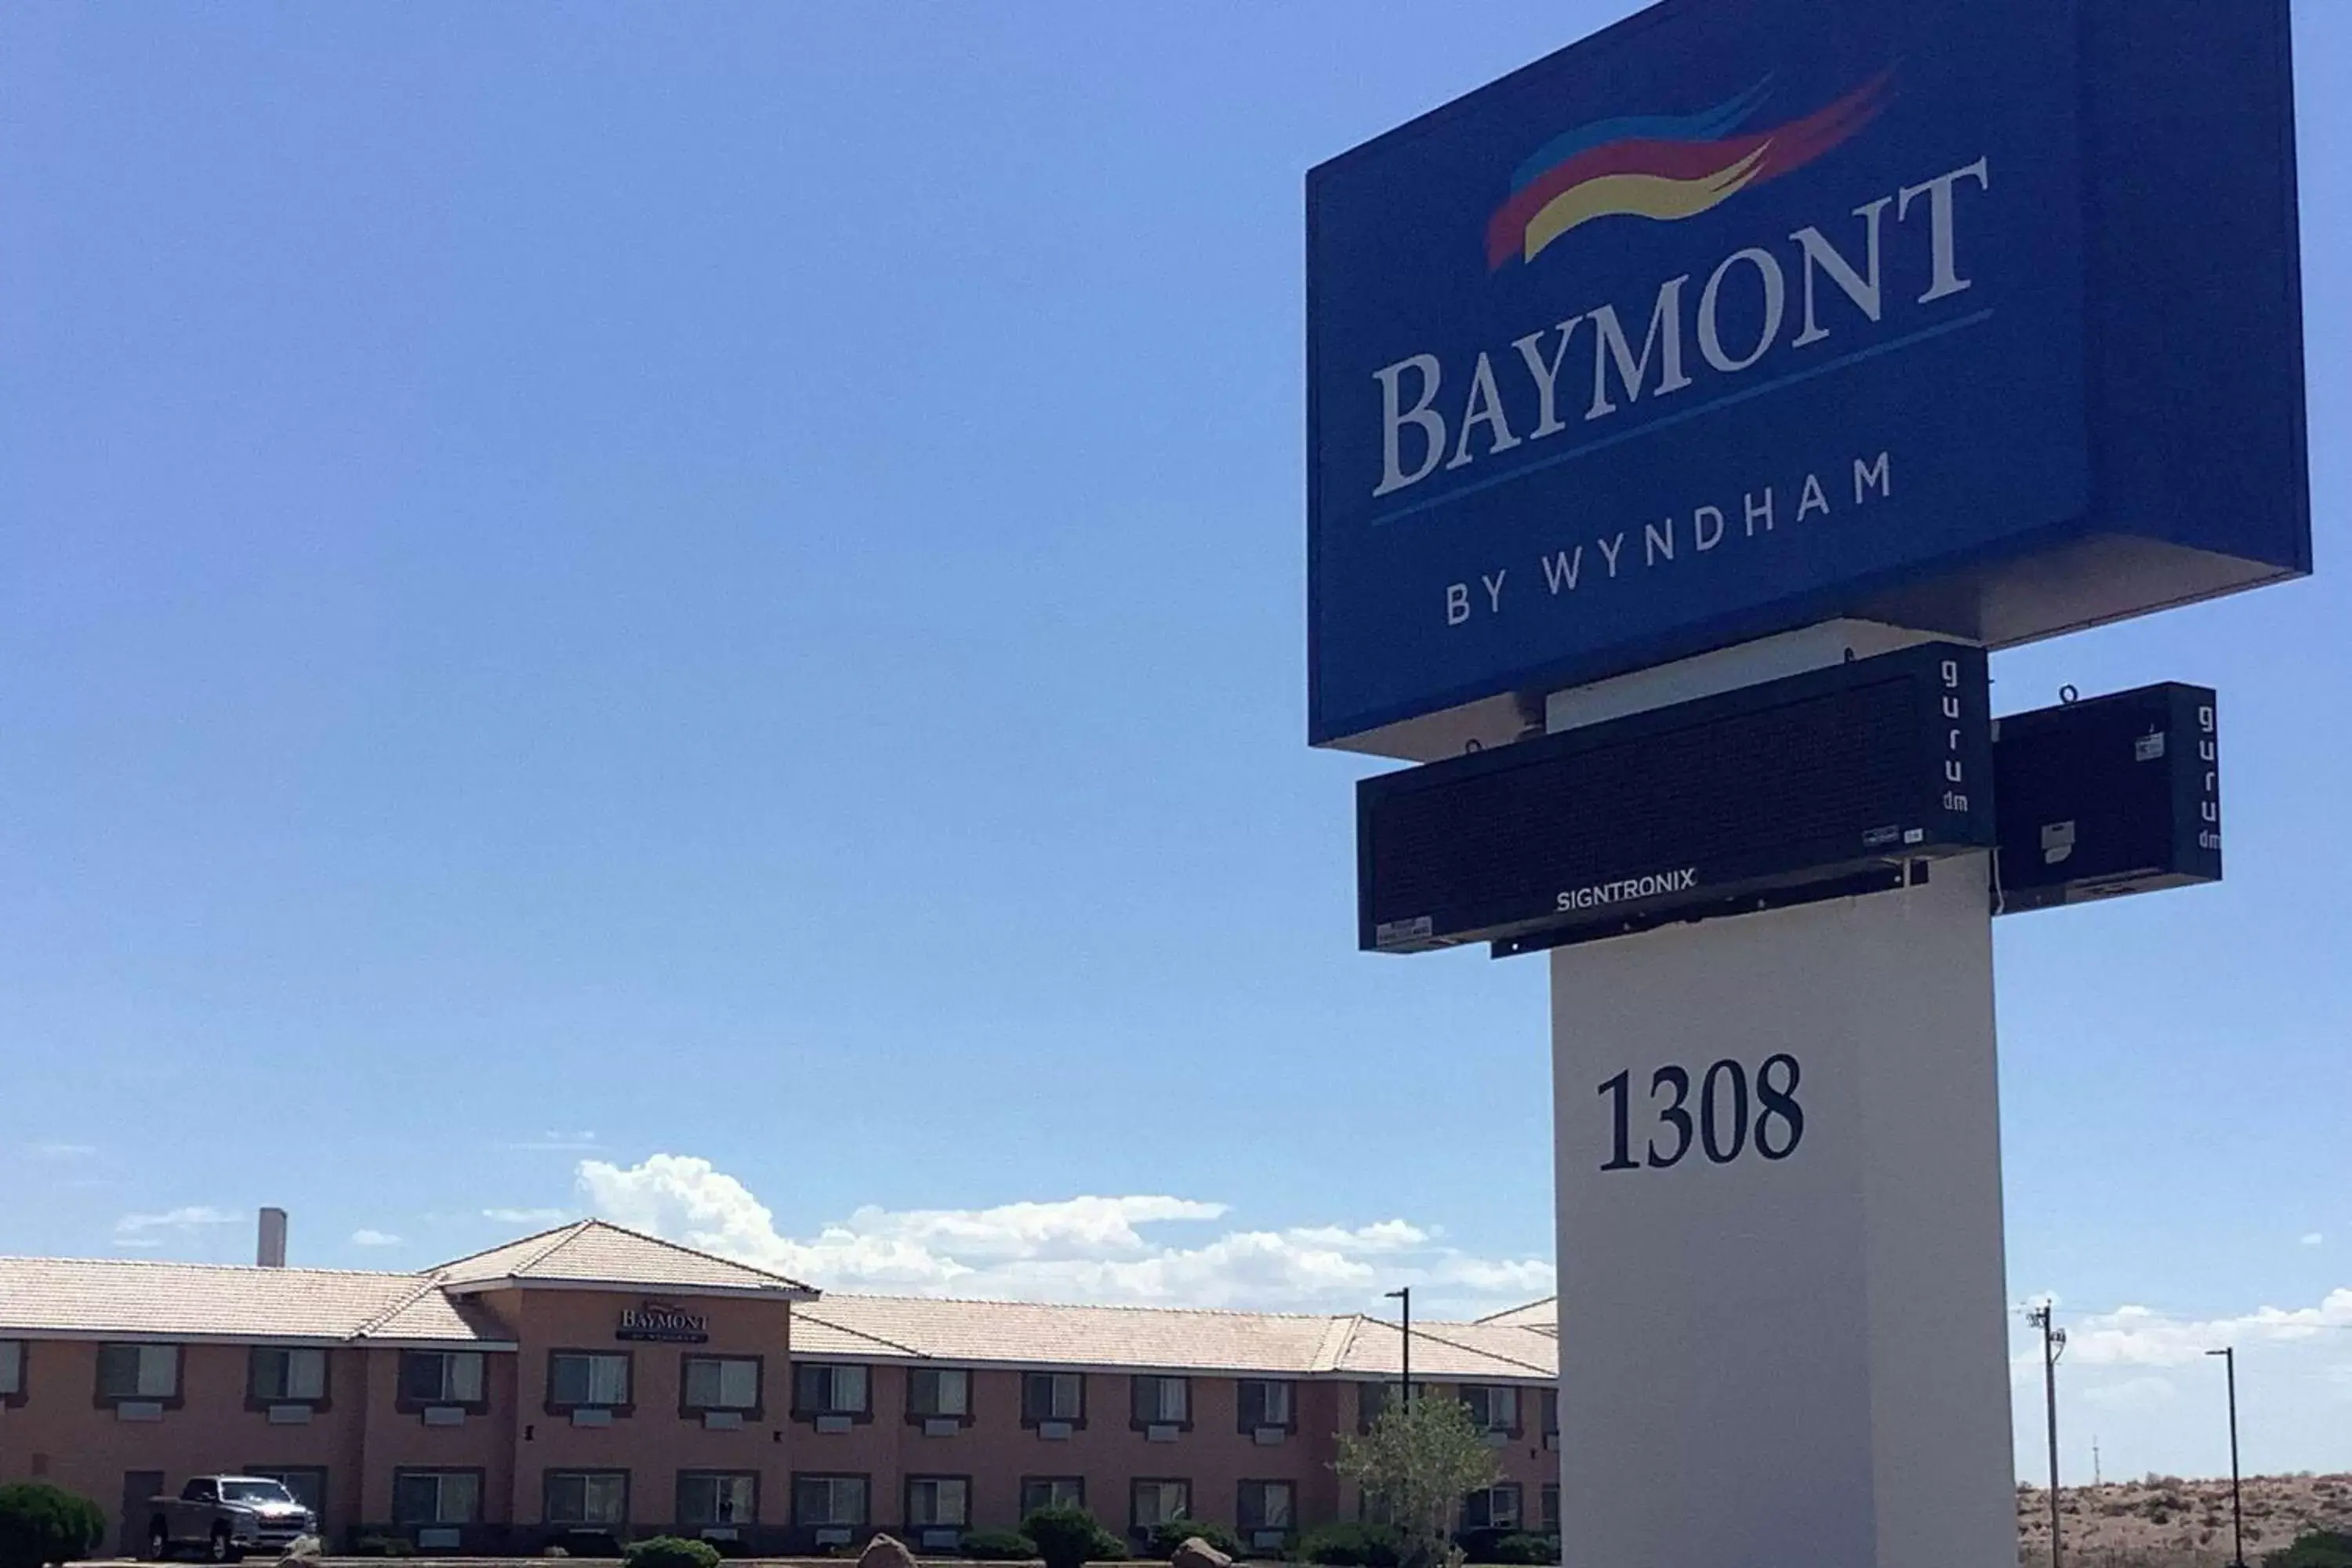 Property building in Baymont Inn & Suites by Wyndham Holbrook